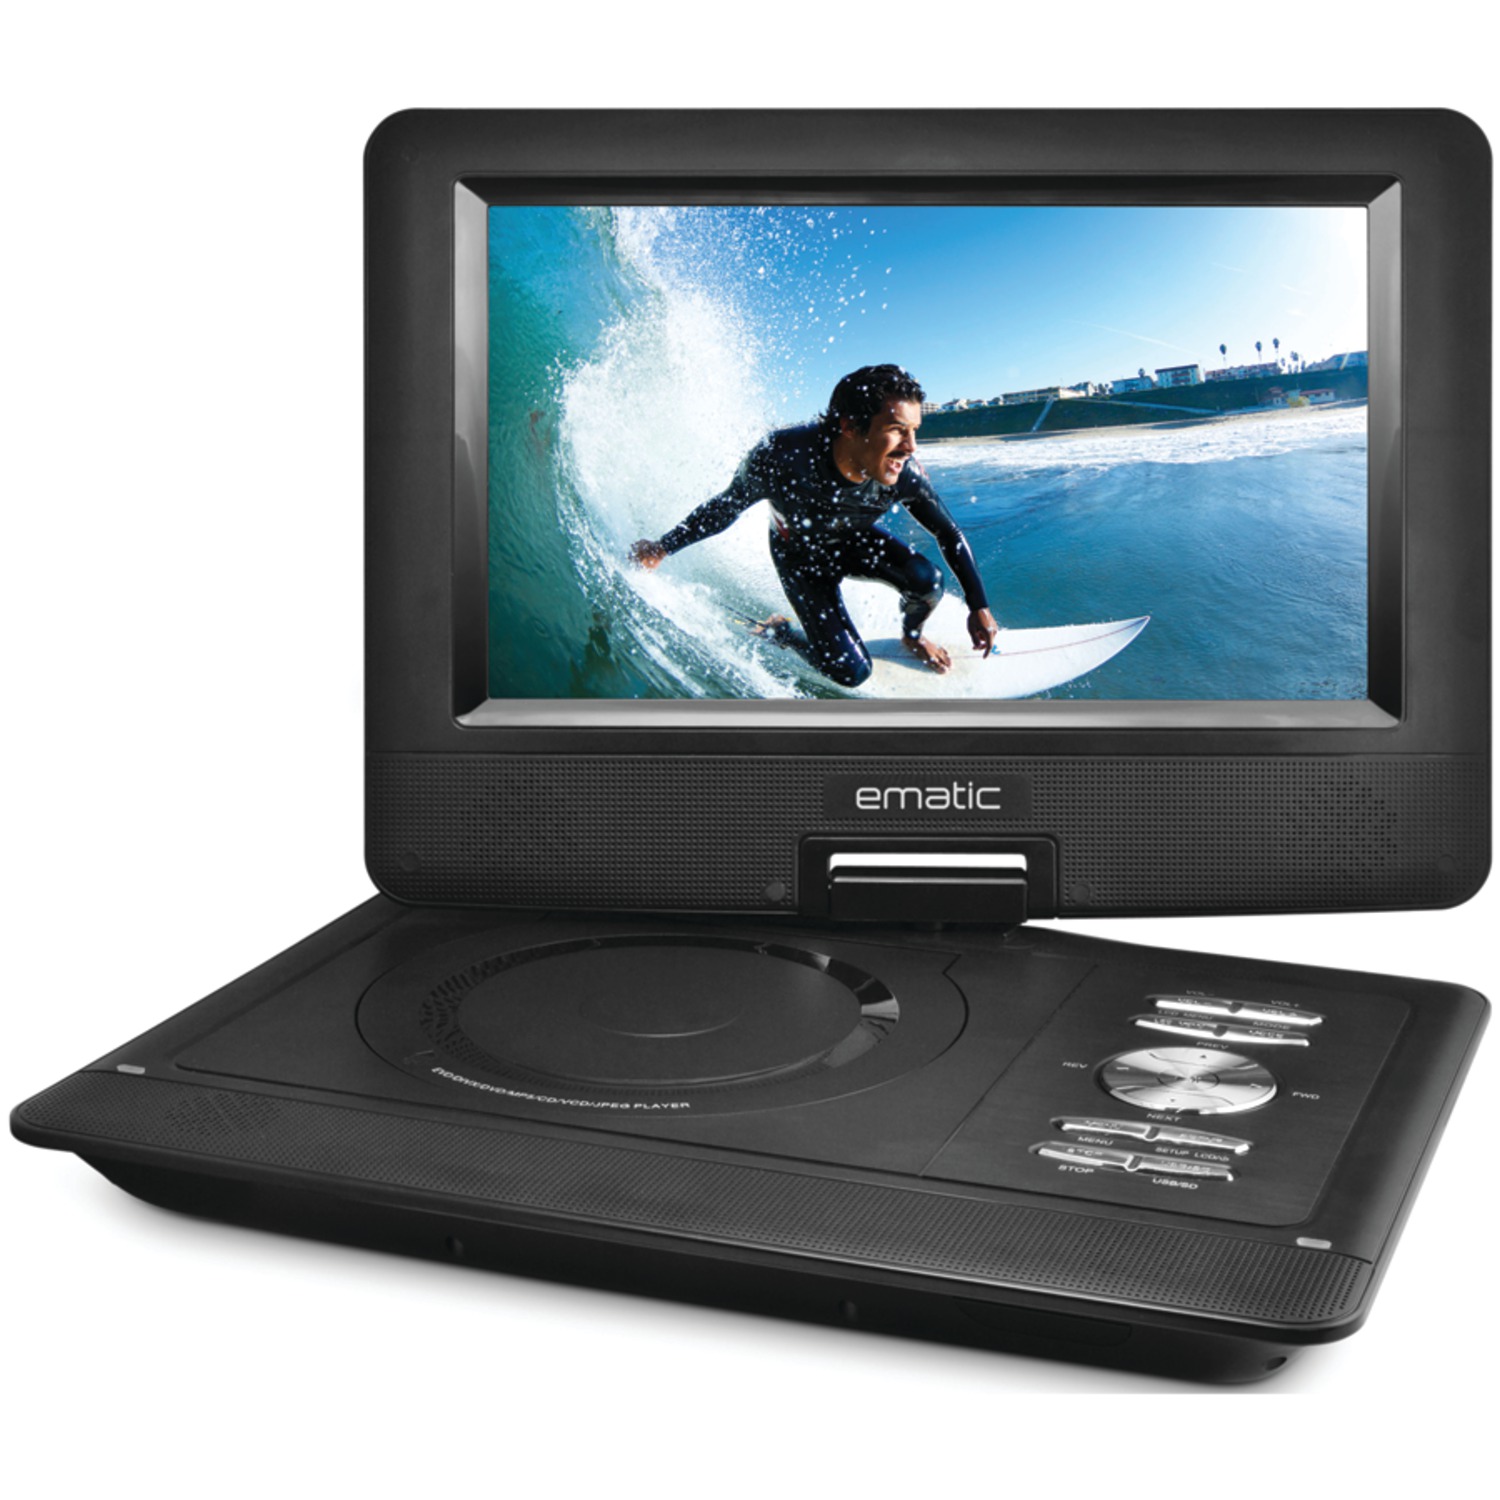 Ematic 10" Portable DVD Player with Headphones and Car-Headrest Mount - EPD116bl - image 2 of 6